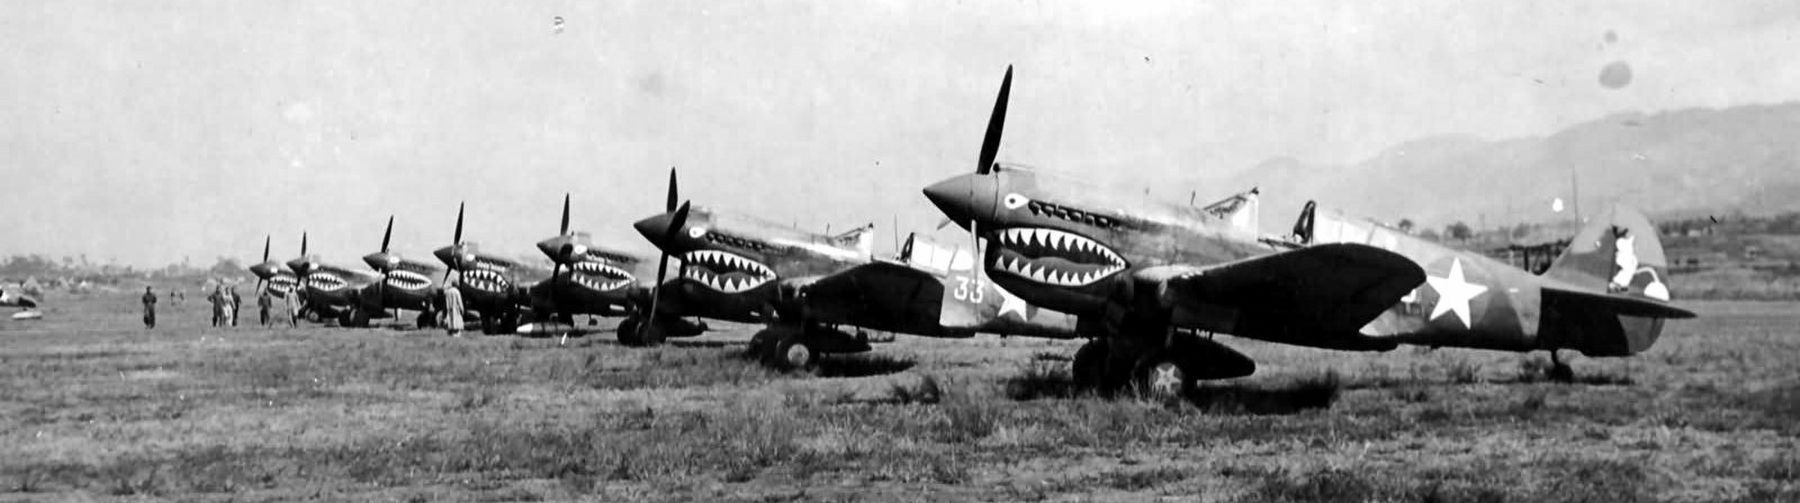 P-40Es of 16th Fighter Squadron, 23rd FG; Kweilin China, October 1942 image. Click for full size.